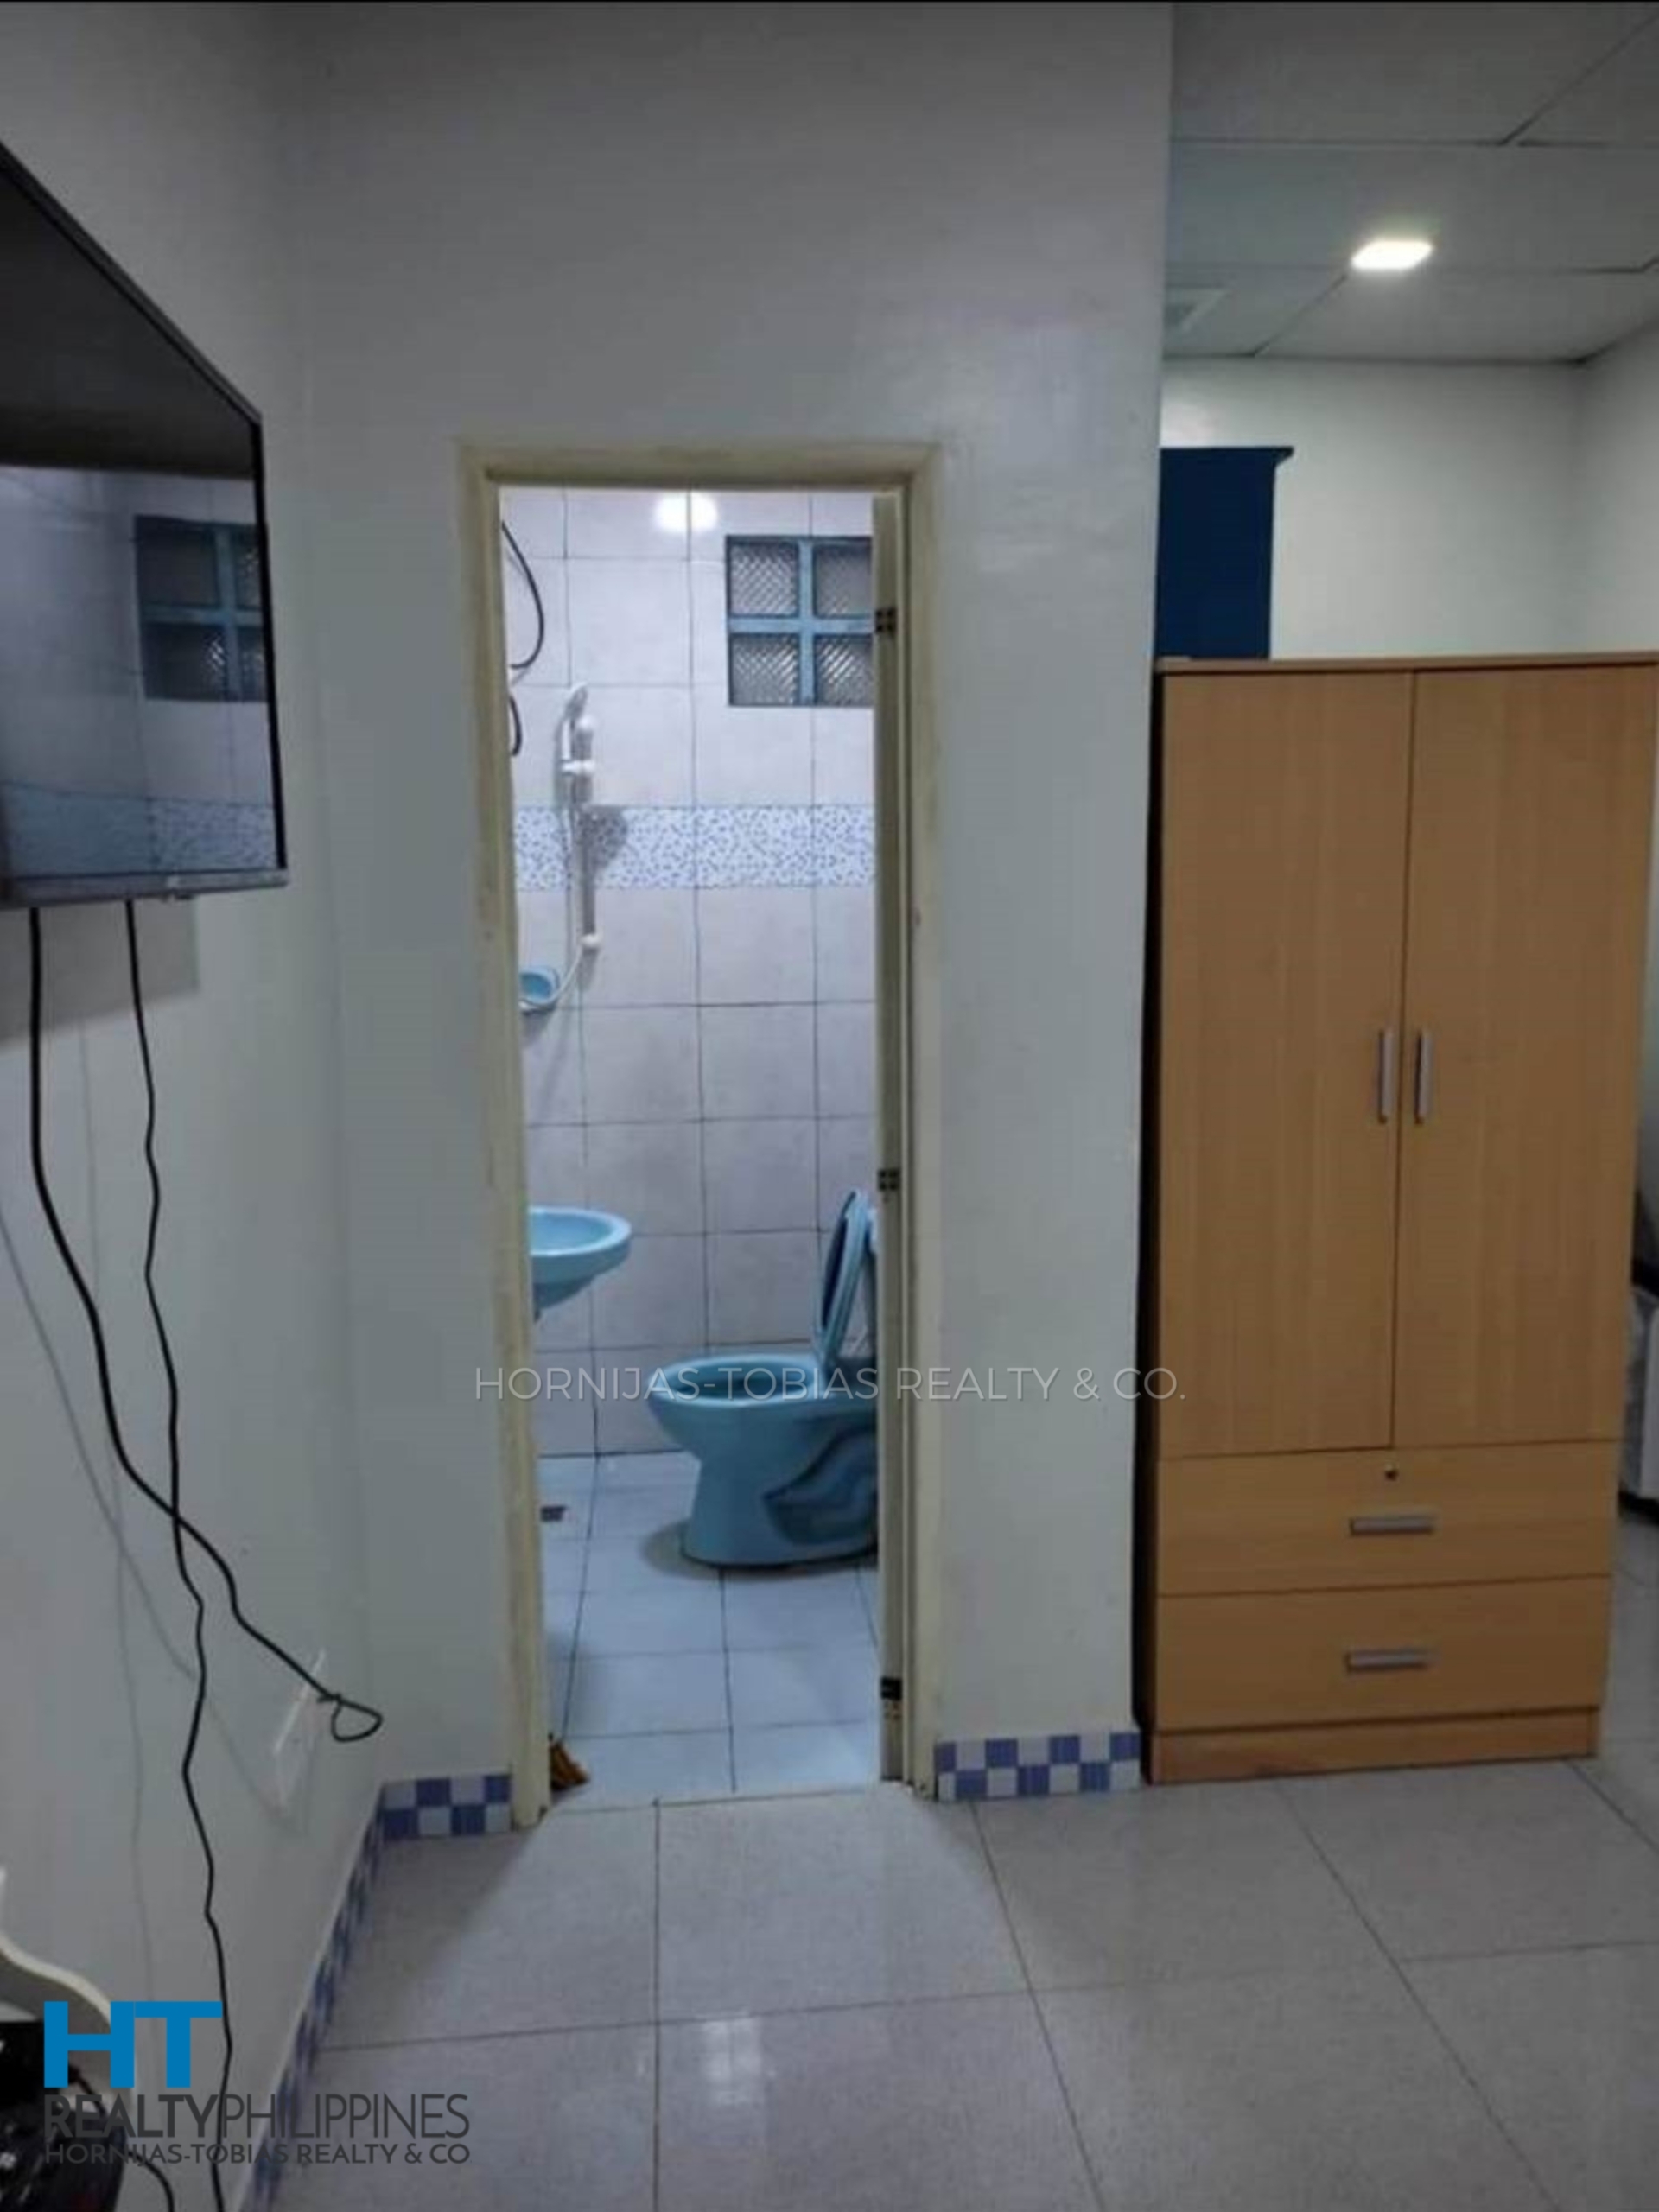 bathroom and cabinets - 12-door 4-floor income-generating apartment building for sale in Buhangin, Davao City